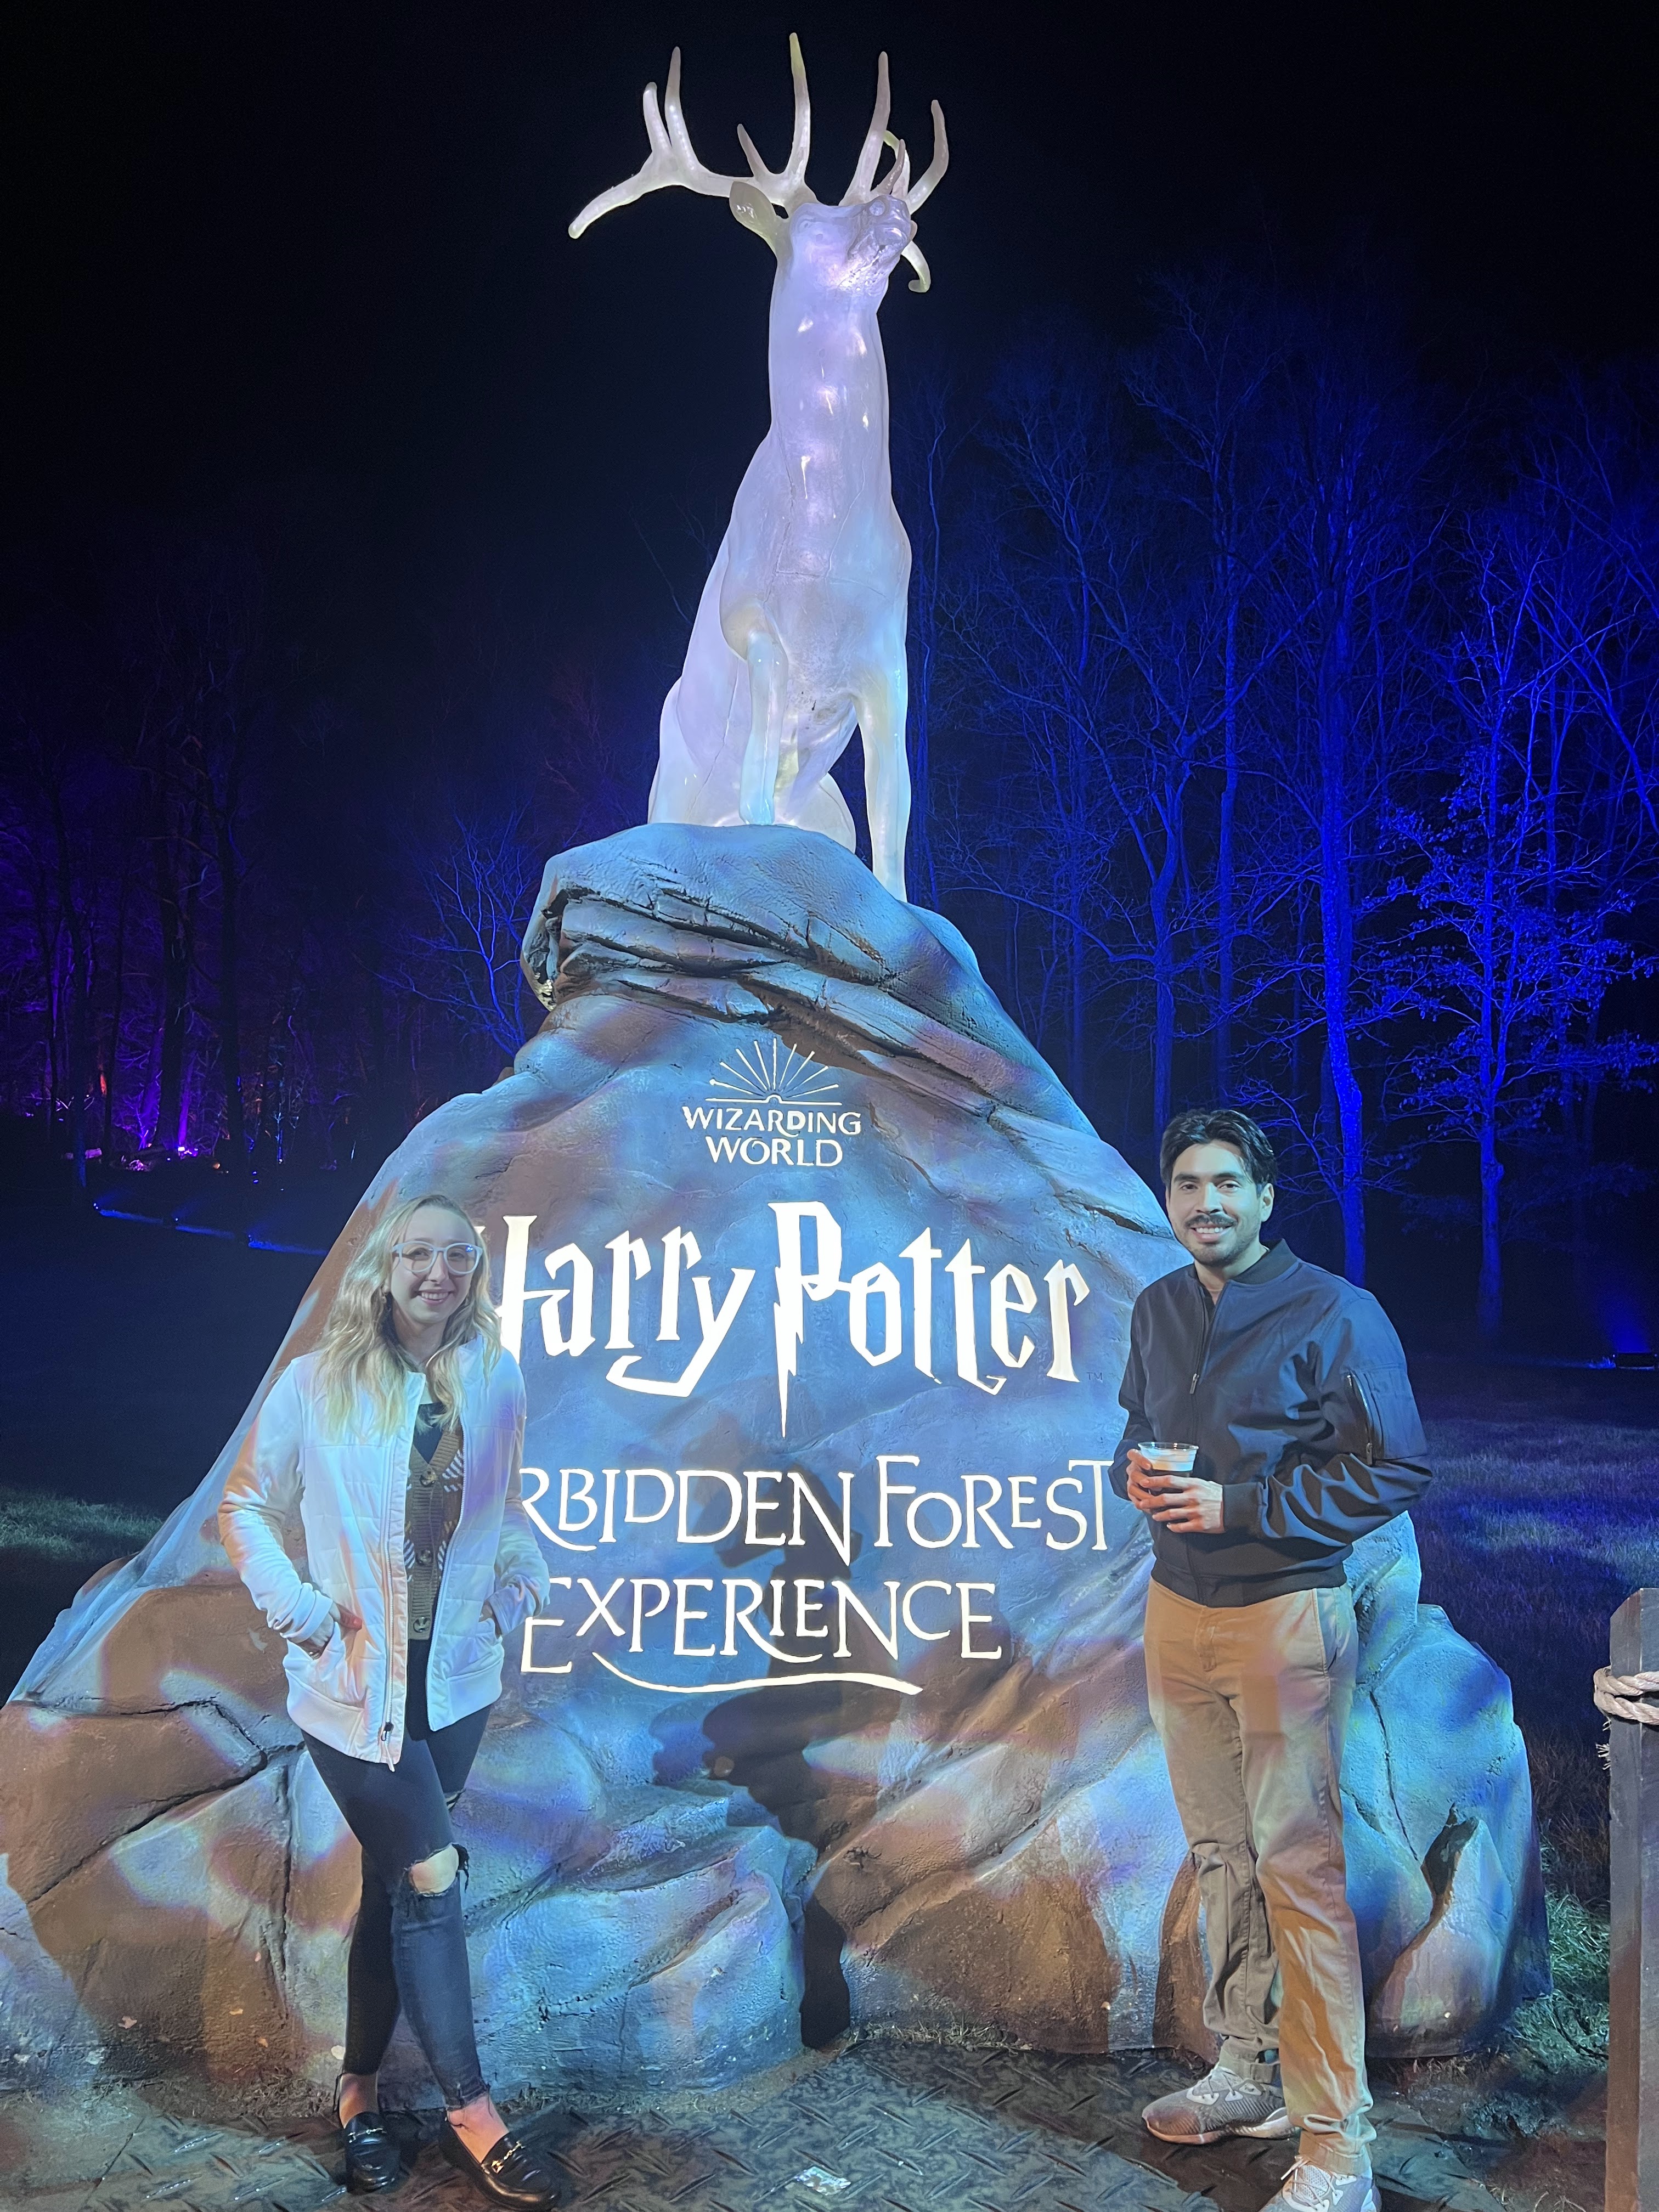 Harry Potter and the Forbidden Forest Experiennce